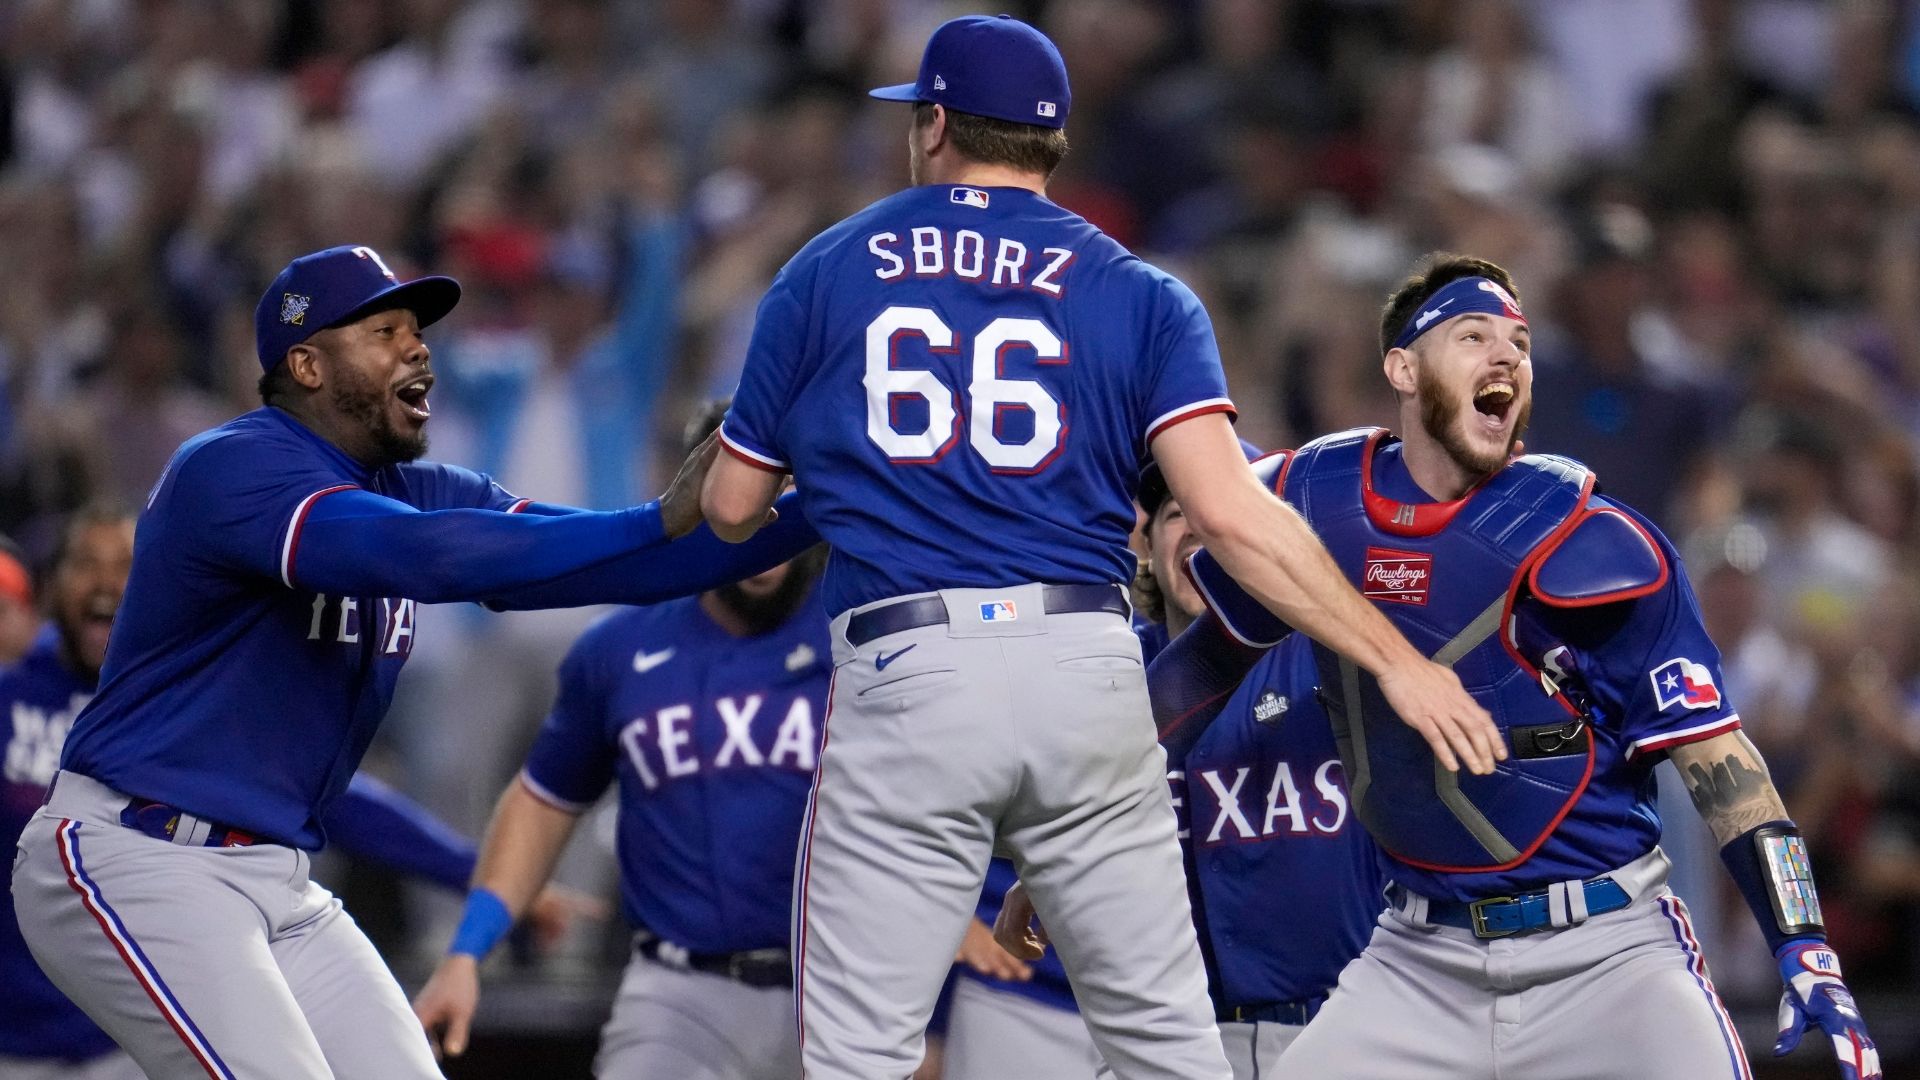 Rangers-D-backs least-watched Fall Classic ever